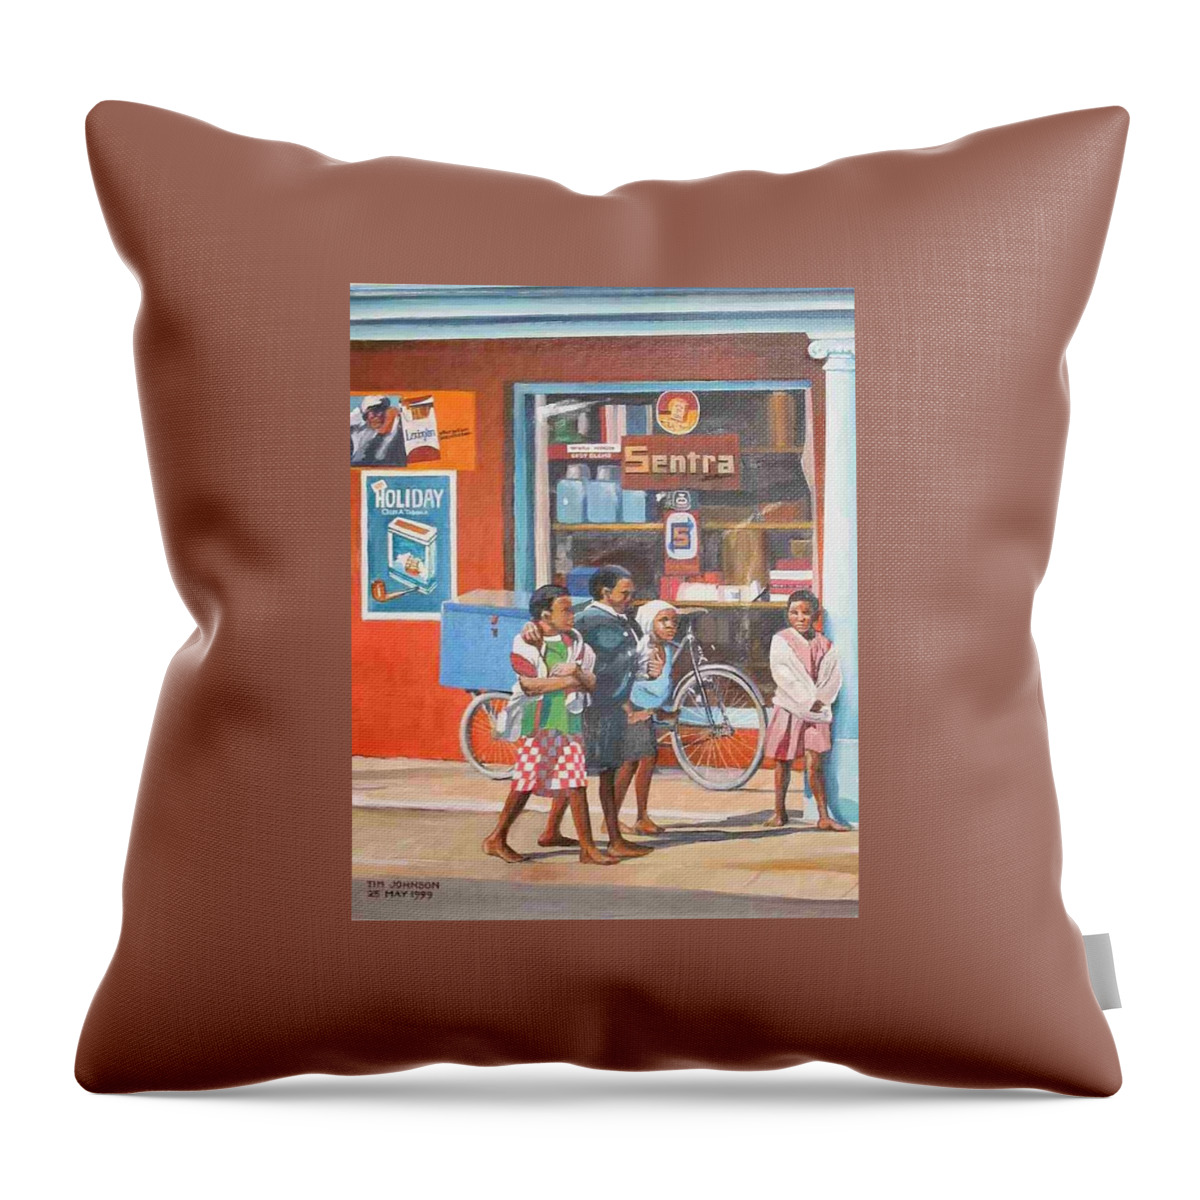 Shop Throw Pillow featuring the painting Sentra by Tim Johnson